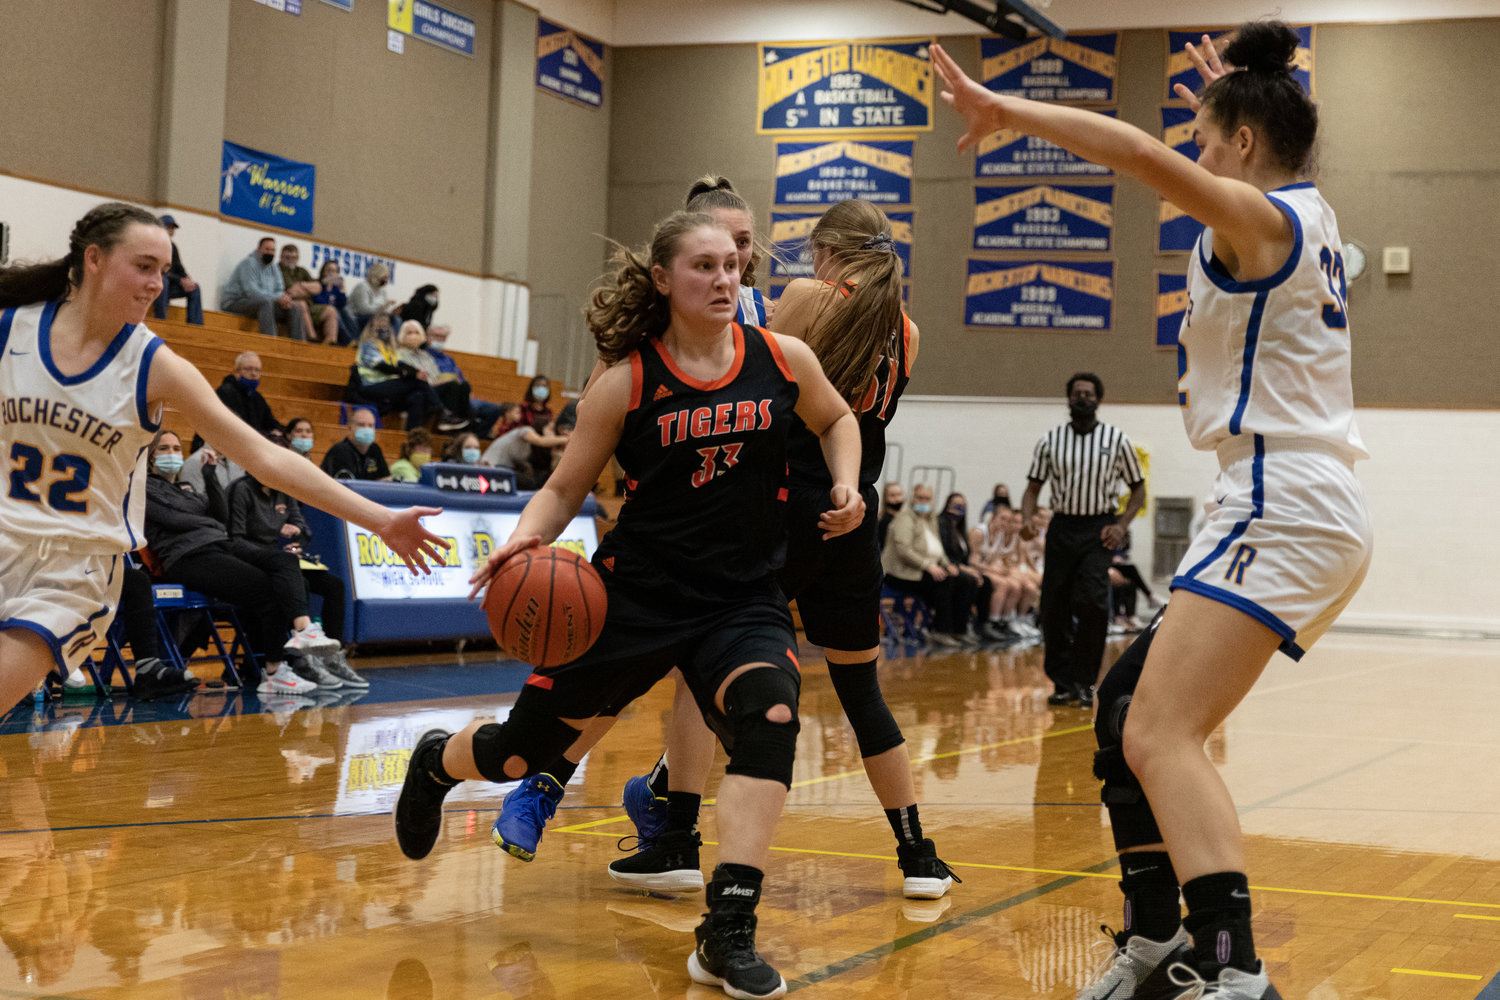 Centralia sophomore post Emily Wilkerson drives toward the hoop against Rochester Dec. 9.